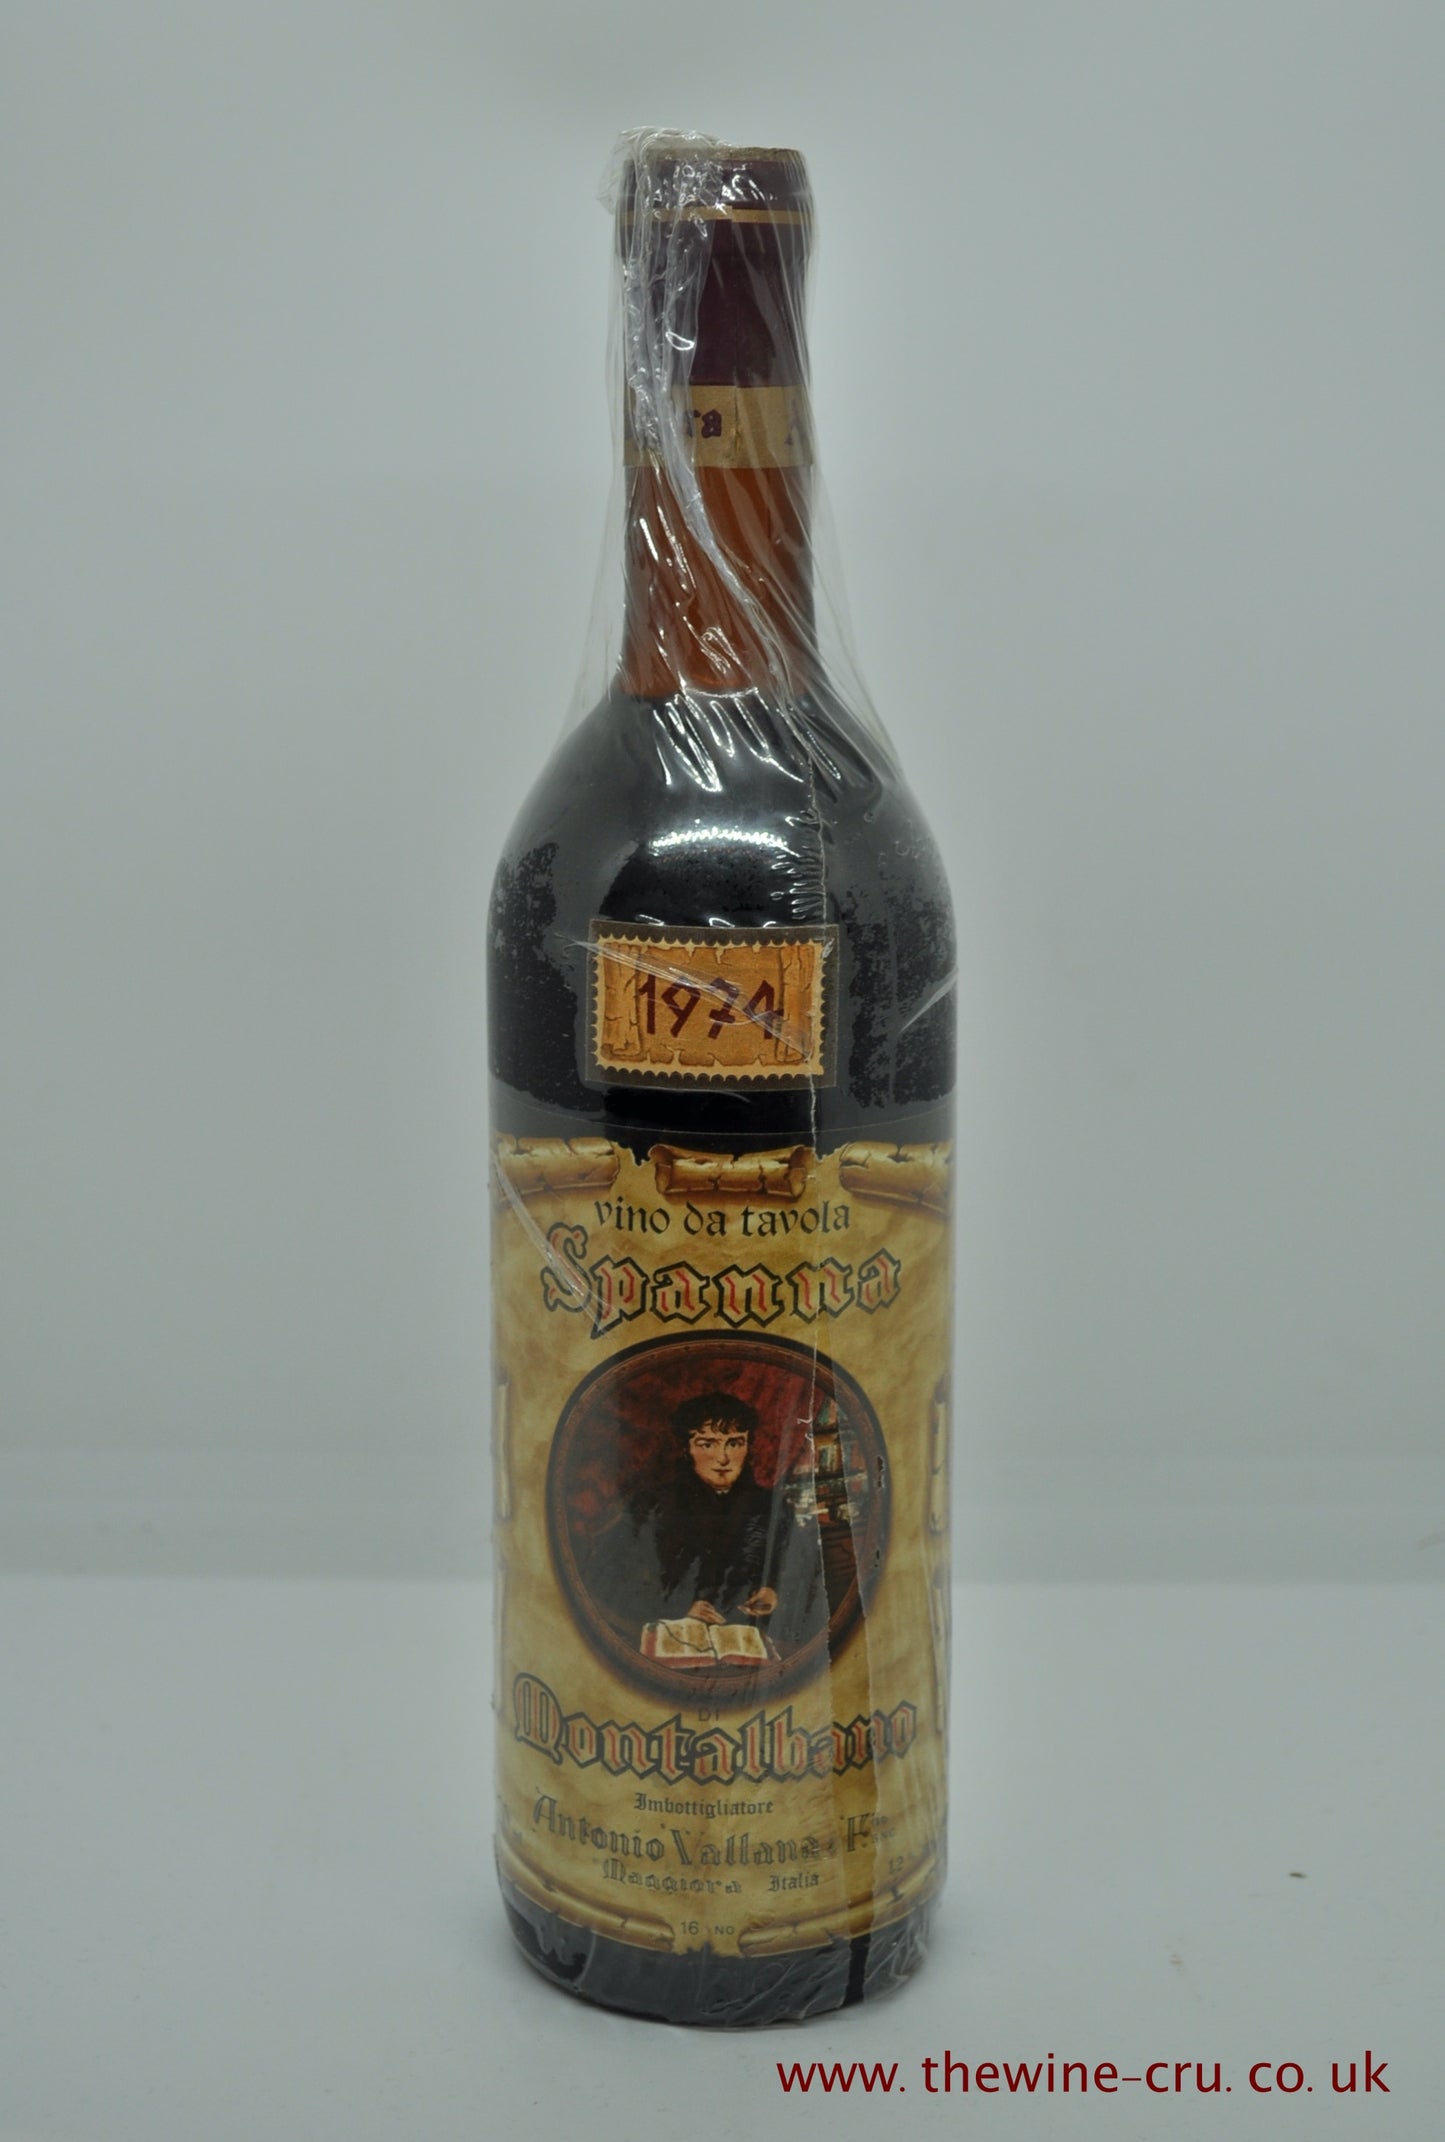 A bottle of 1974 vintage red wine. Montalbano Spanna from Antonio Vallana e Figilo in Piedmont, Italy. The bottle is in good condition with the wine level at base of the neck. Immediate delivery. Free local delivery. Gift wrapping available.